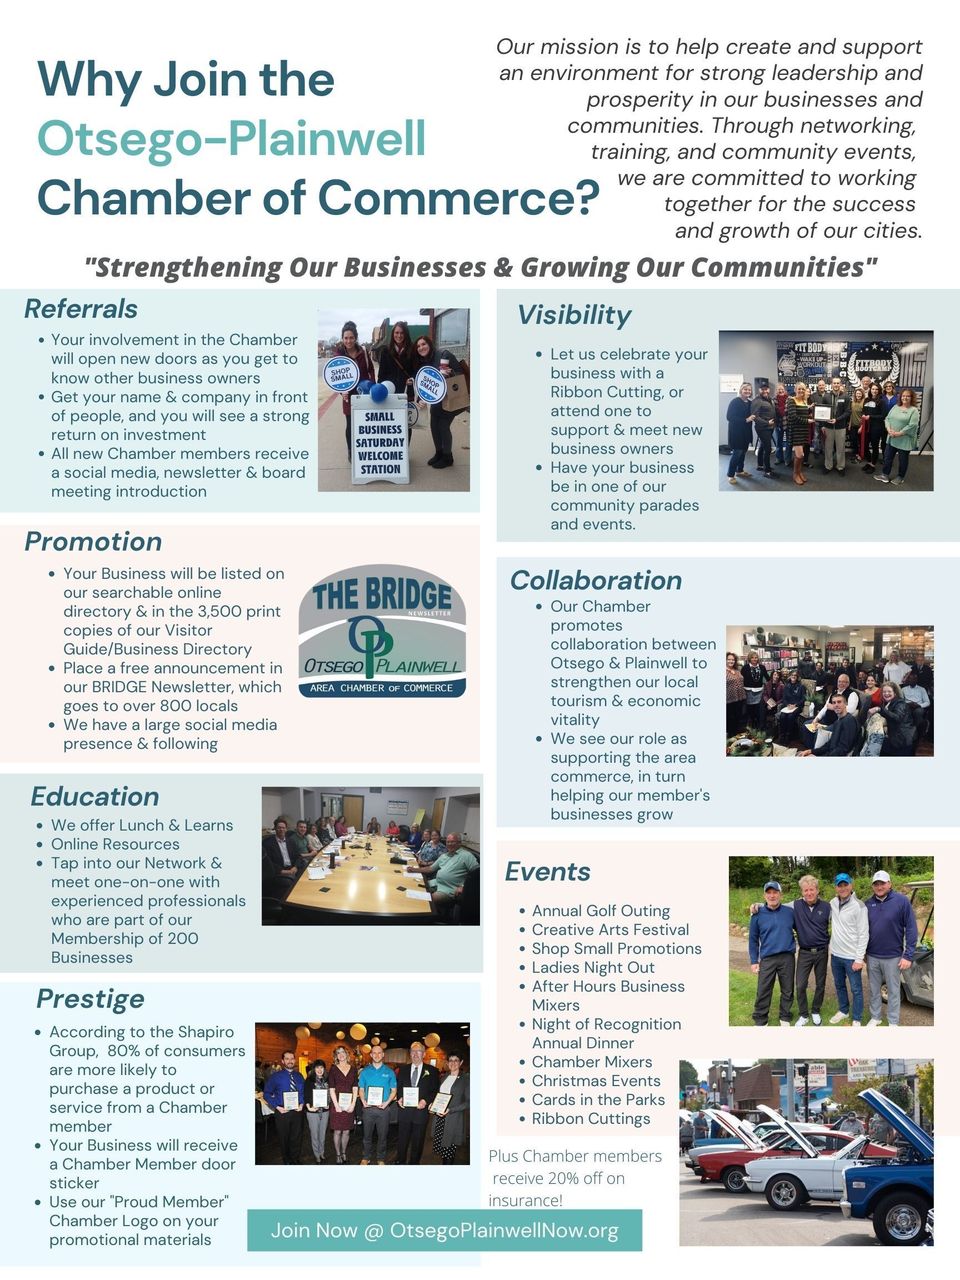 Why join the chamber page 0